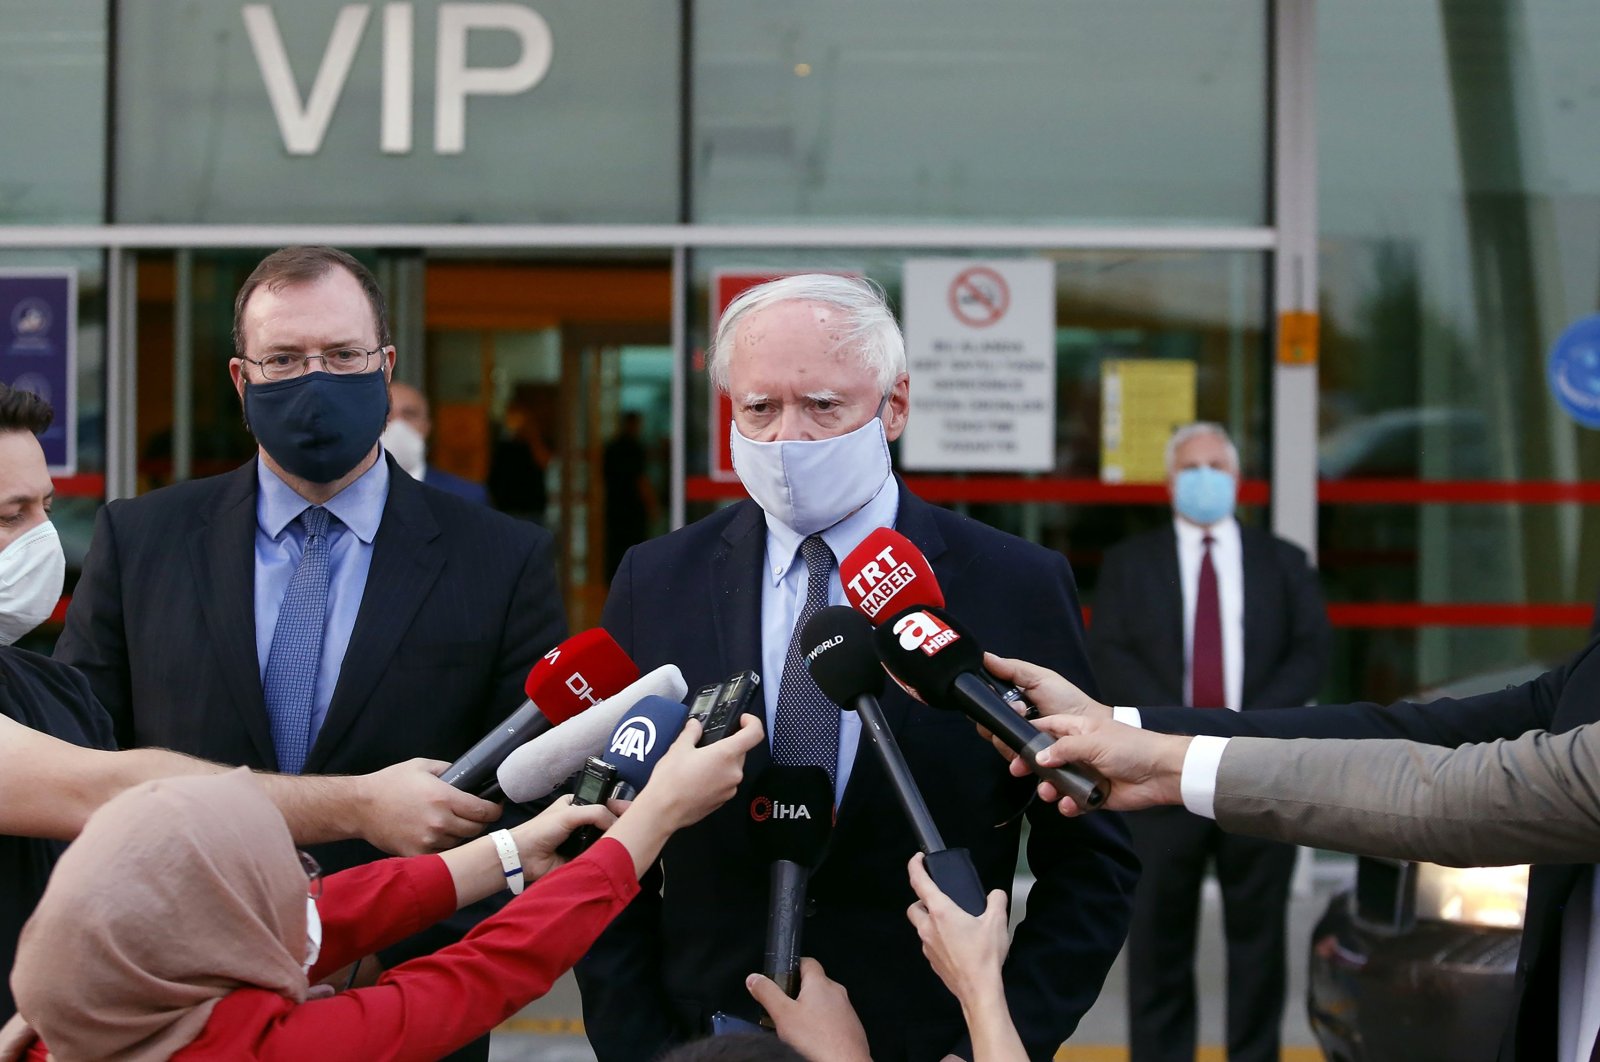 U.S. Special Representative for Syria James Jeffrey (C) speaks to the press after arriving at Esenboğa Airport in Ankara, Aug. 26, 2020. (AFP Photo)